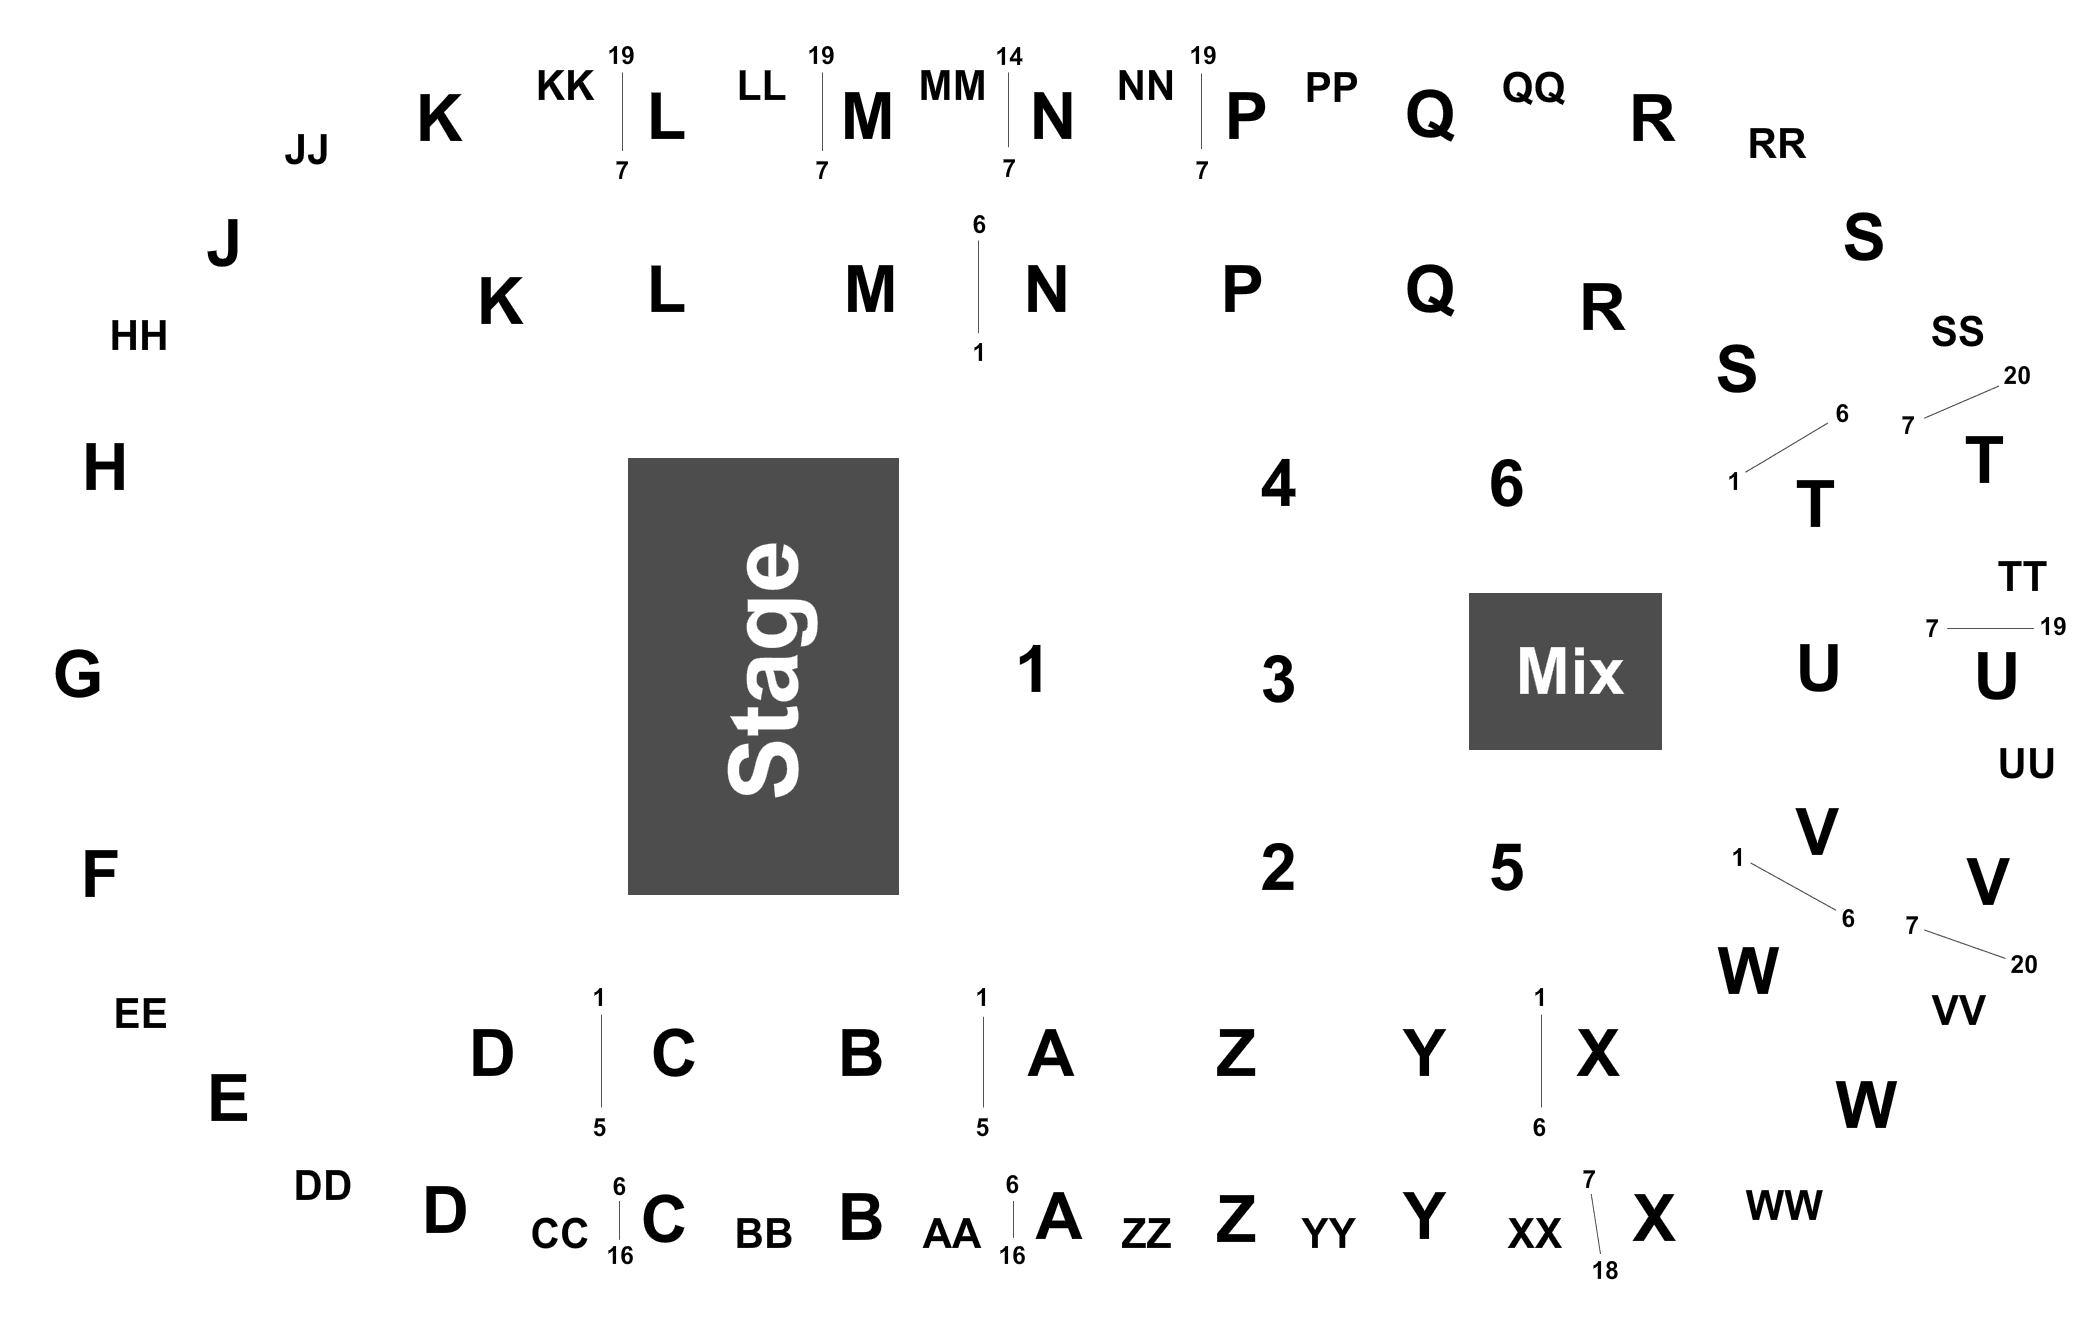 Top 165+ images toyota center kennewick seating chart In.thptnganamst